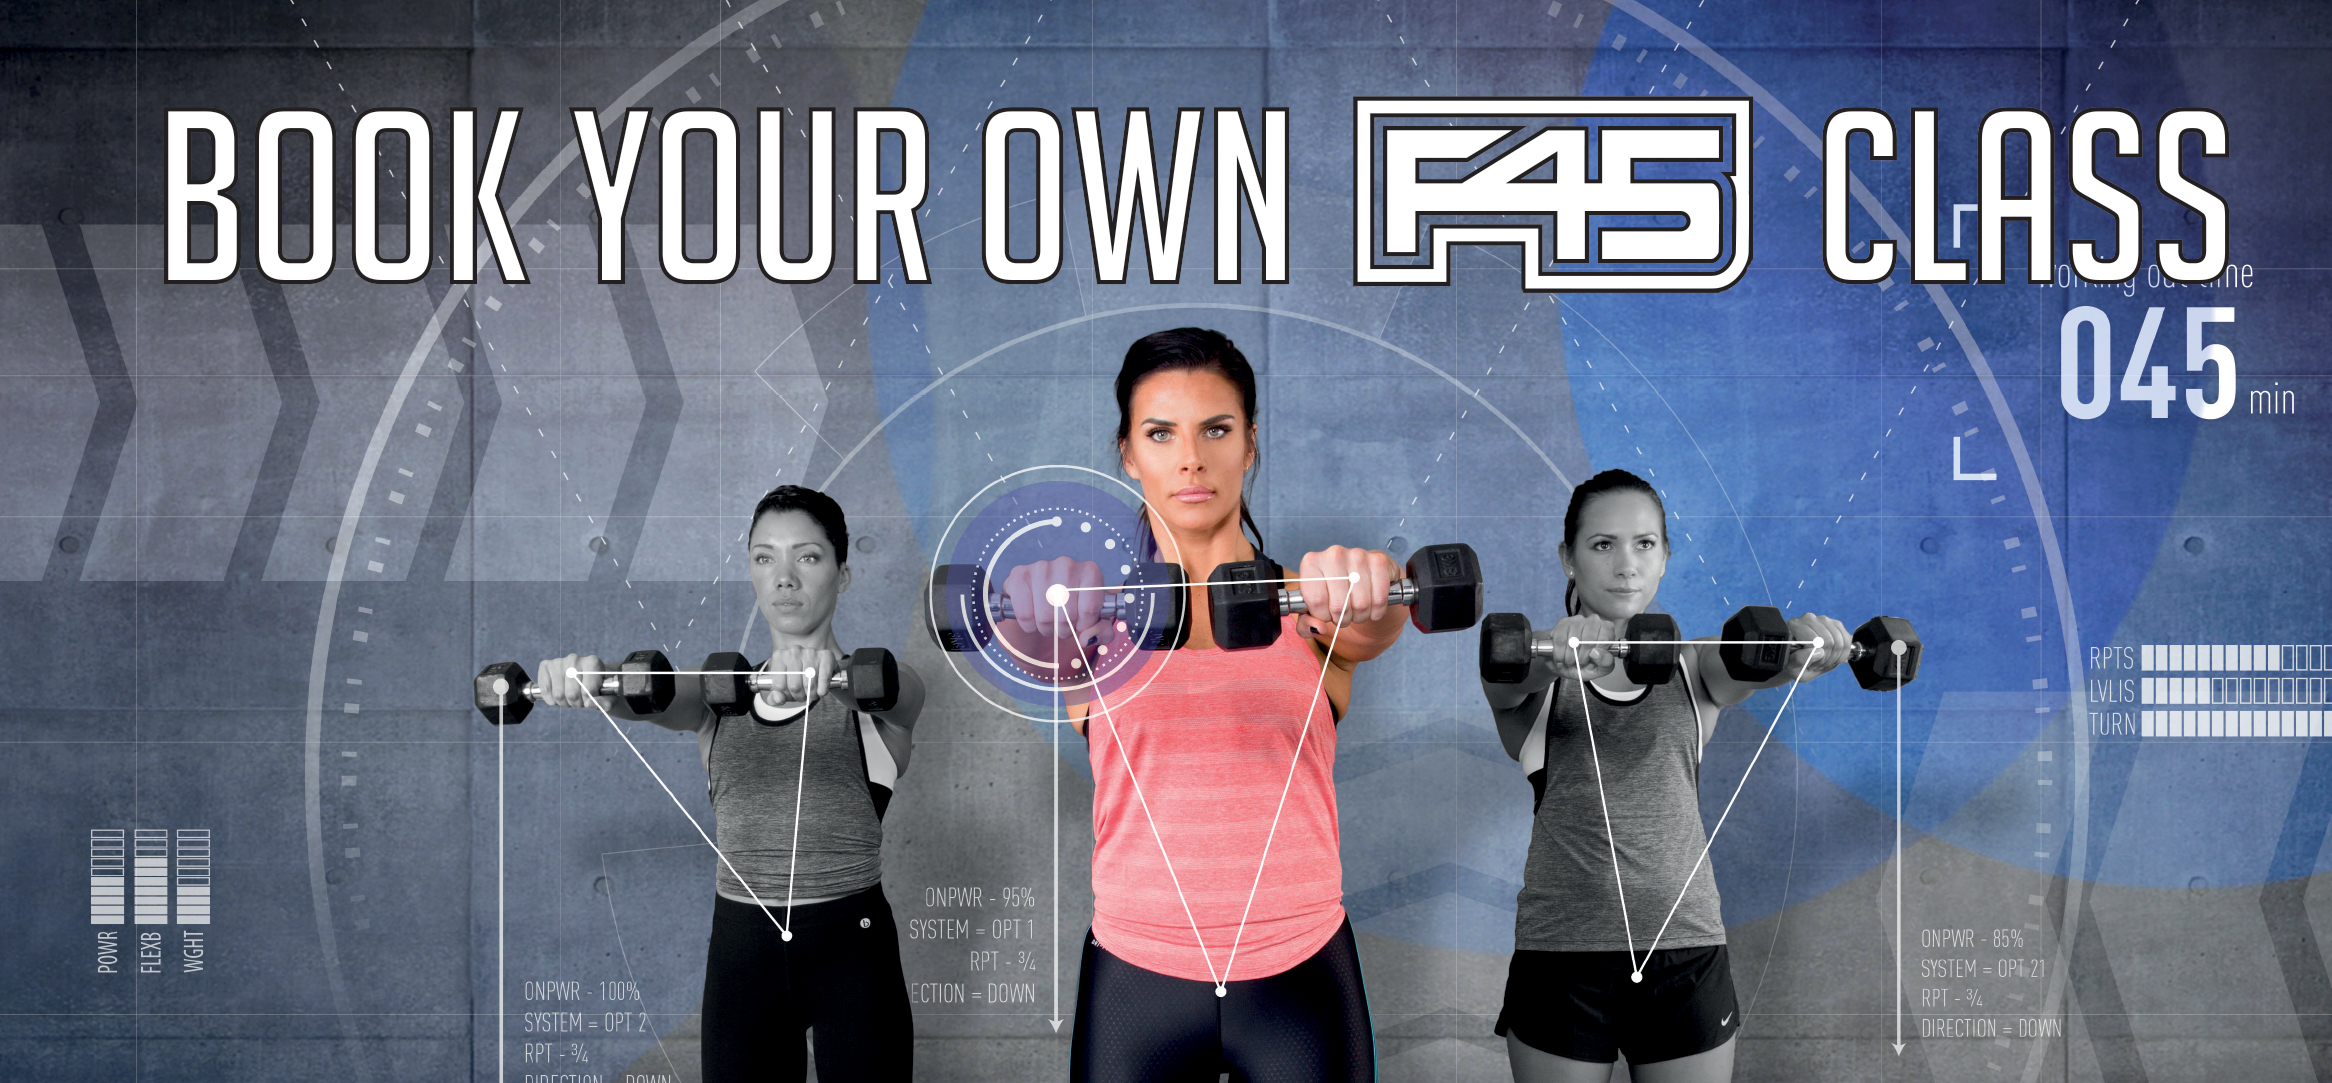 Book your own F45 class promo image